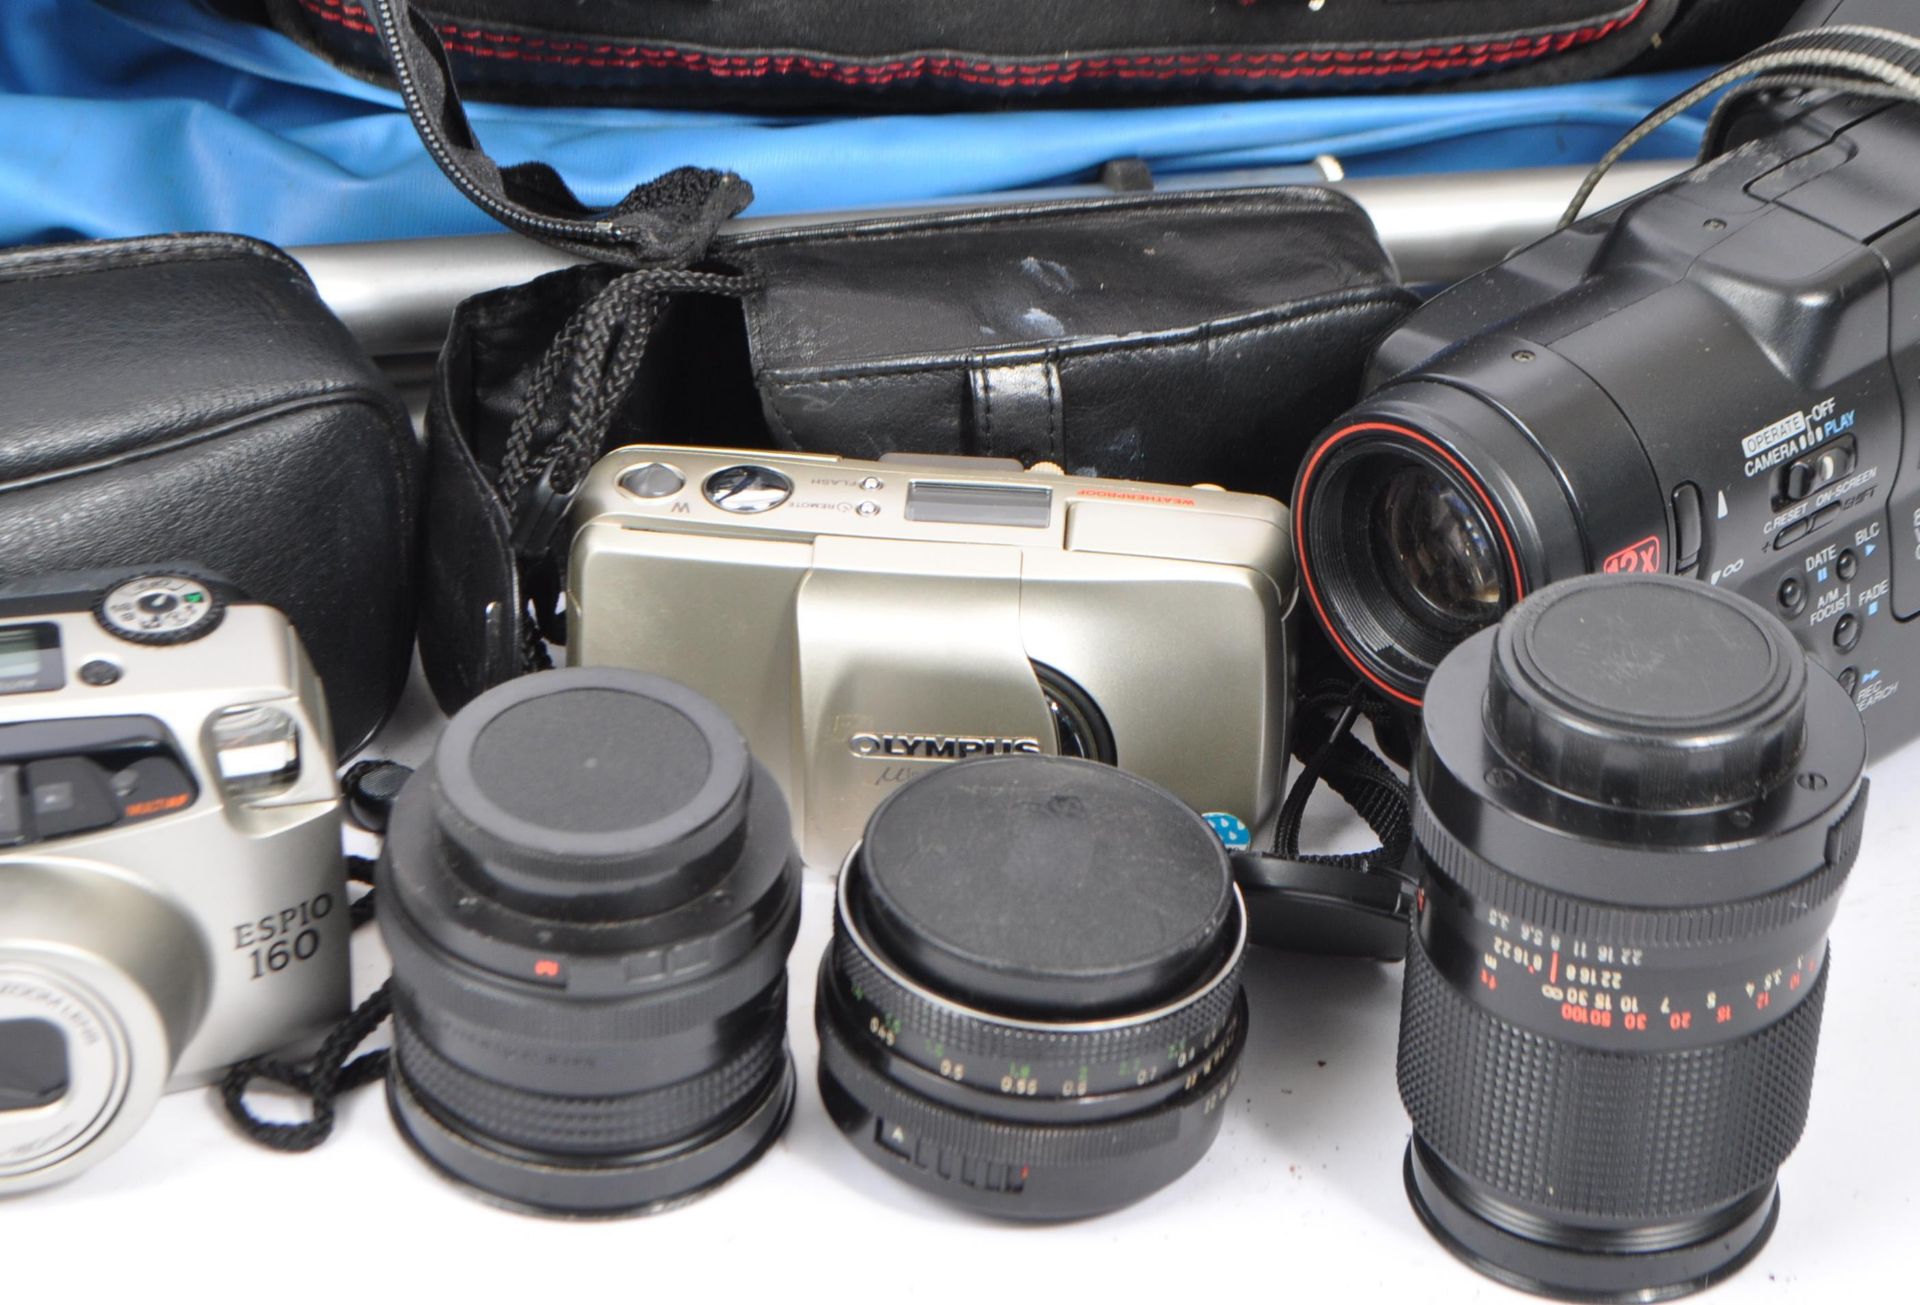 COLLECTION OF VINTAGE PHOTOGRAPHY CAMERA LENSES ACCESSORIES - Image 2 of 5